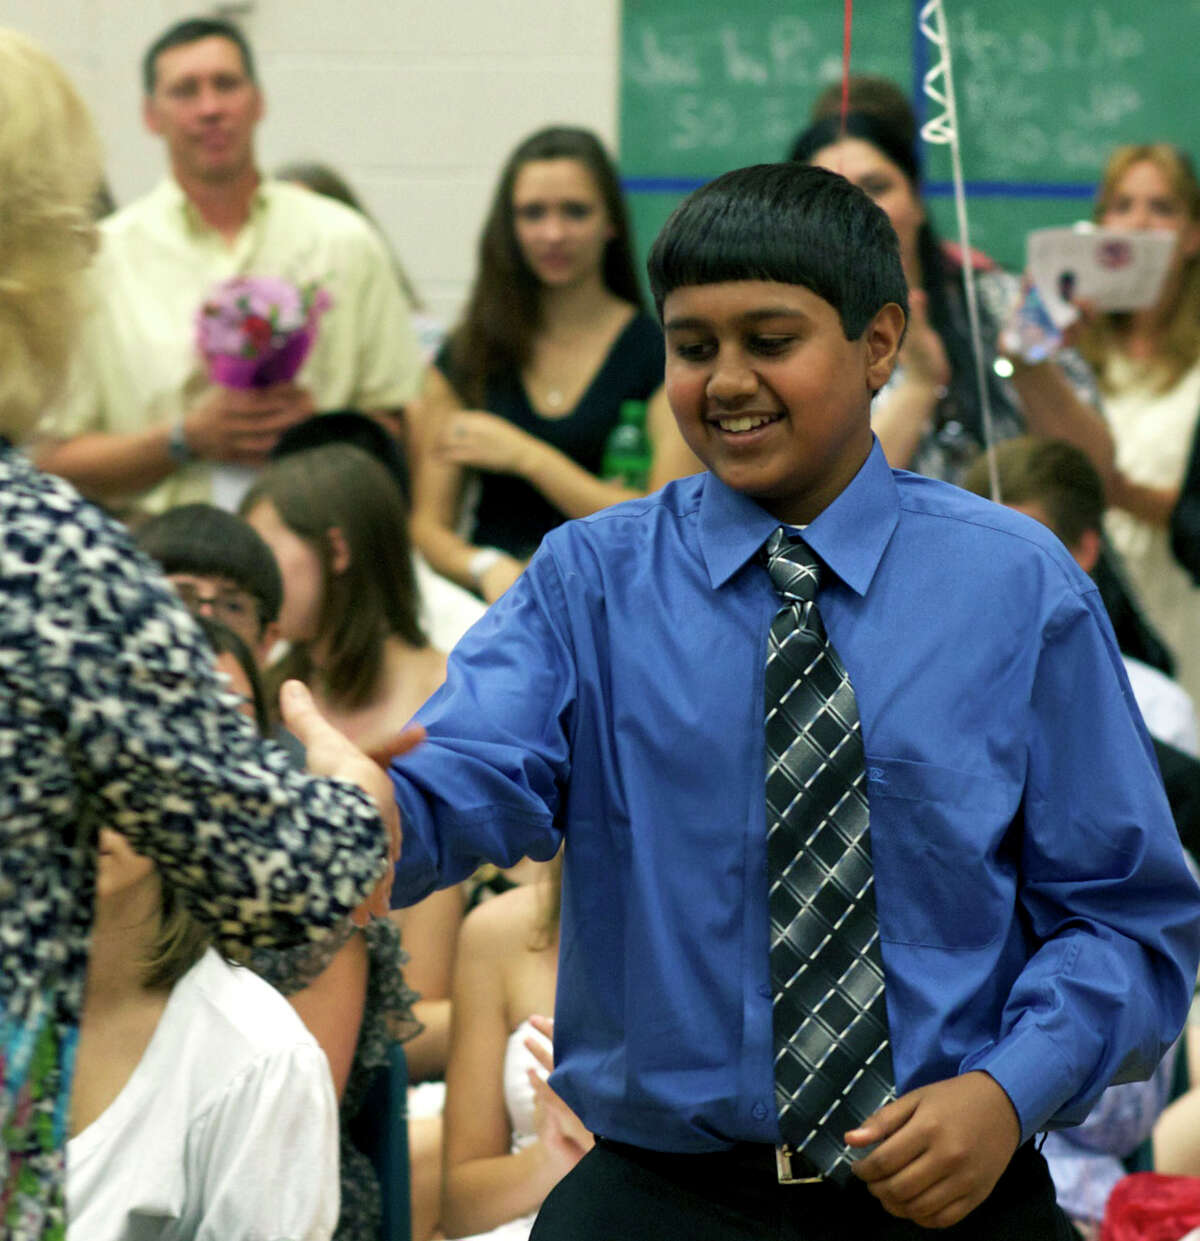 Aakash Parikh is justifiably all smiles as he collects awards including Outstanding Student in Science, Outstanding Achievement in Math, the Cabe Scholars and perfect attendance for five years during Team Red and Team Blue's promotion ceremony at Schaghticoke Middle School in New Milford. June 18, 2012